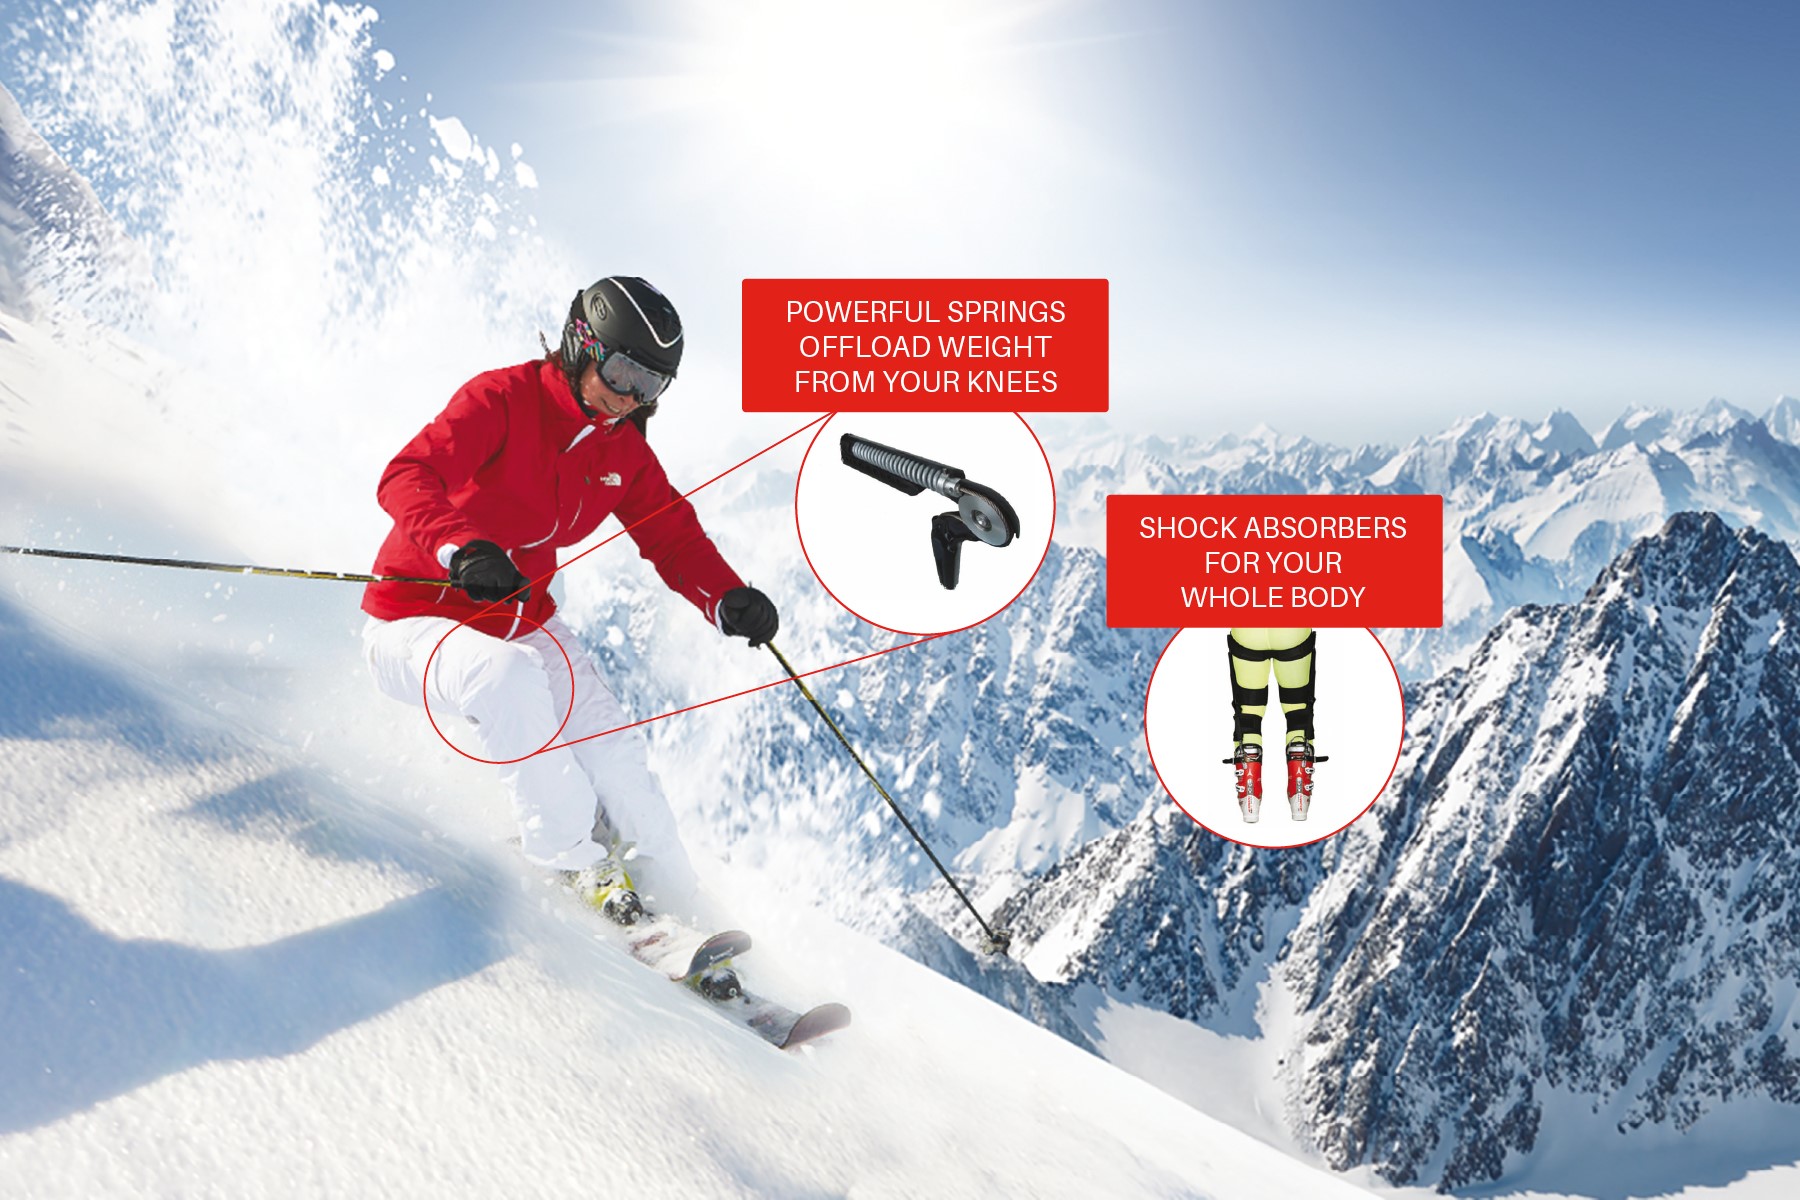 ski~mojo is an exoskeleton for the legs with a comfortable knee support containing powerful springs. Old knees do not need to mean no more skiing! ski~mojo's review